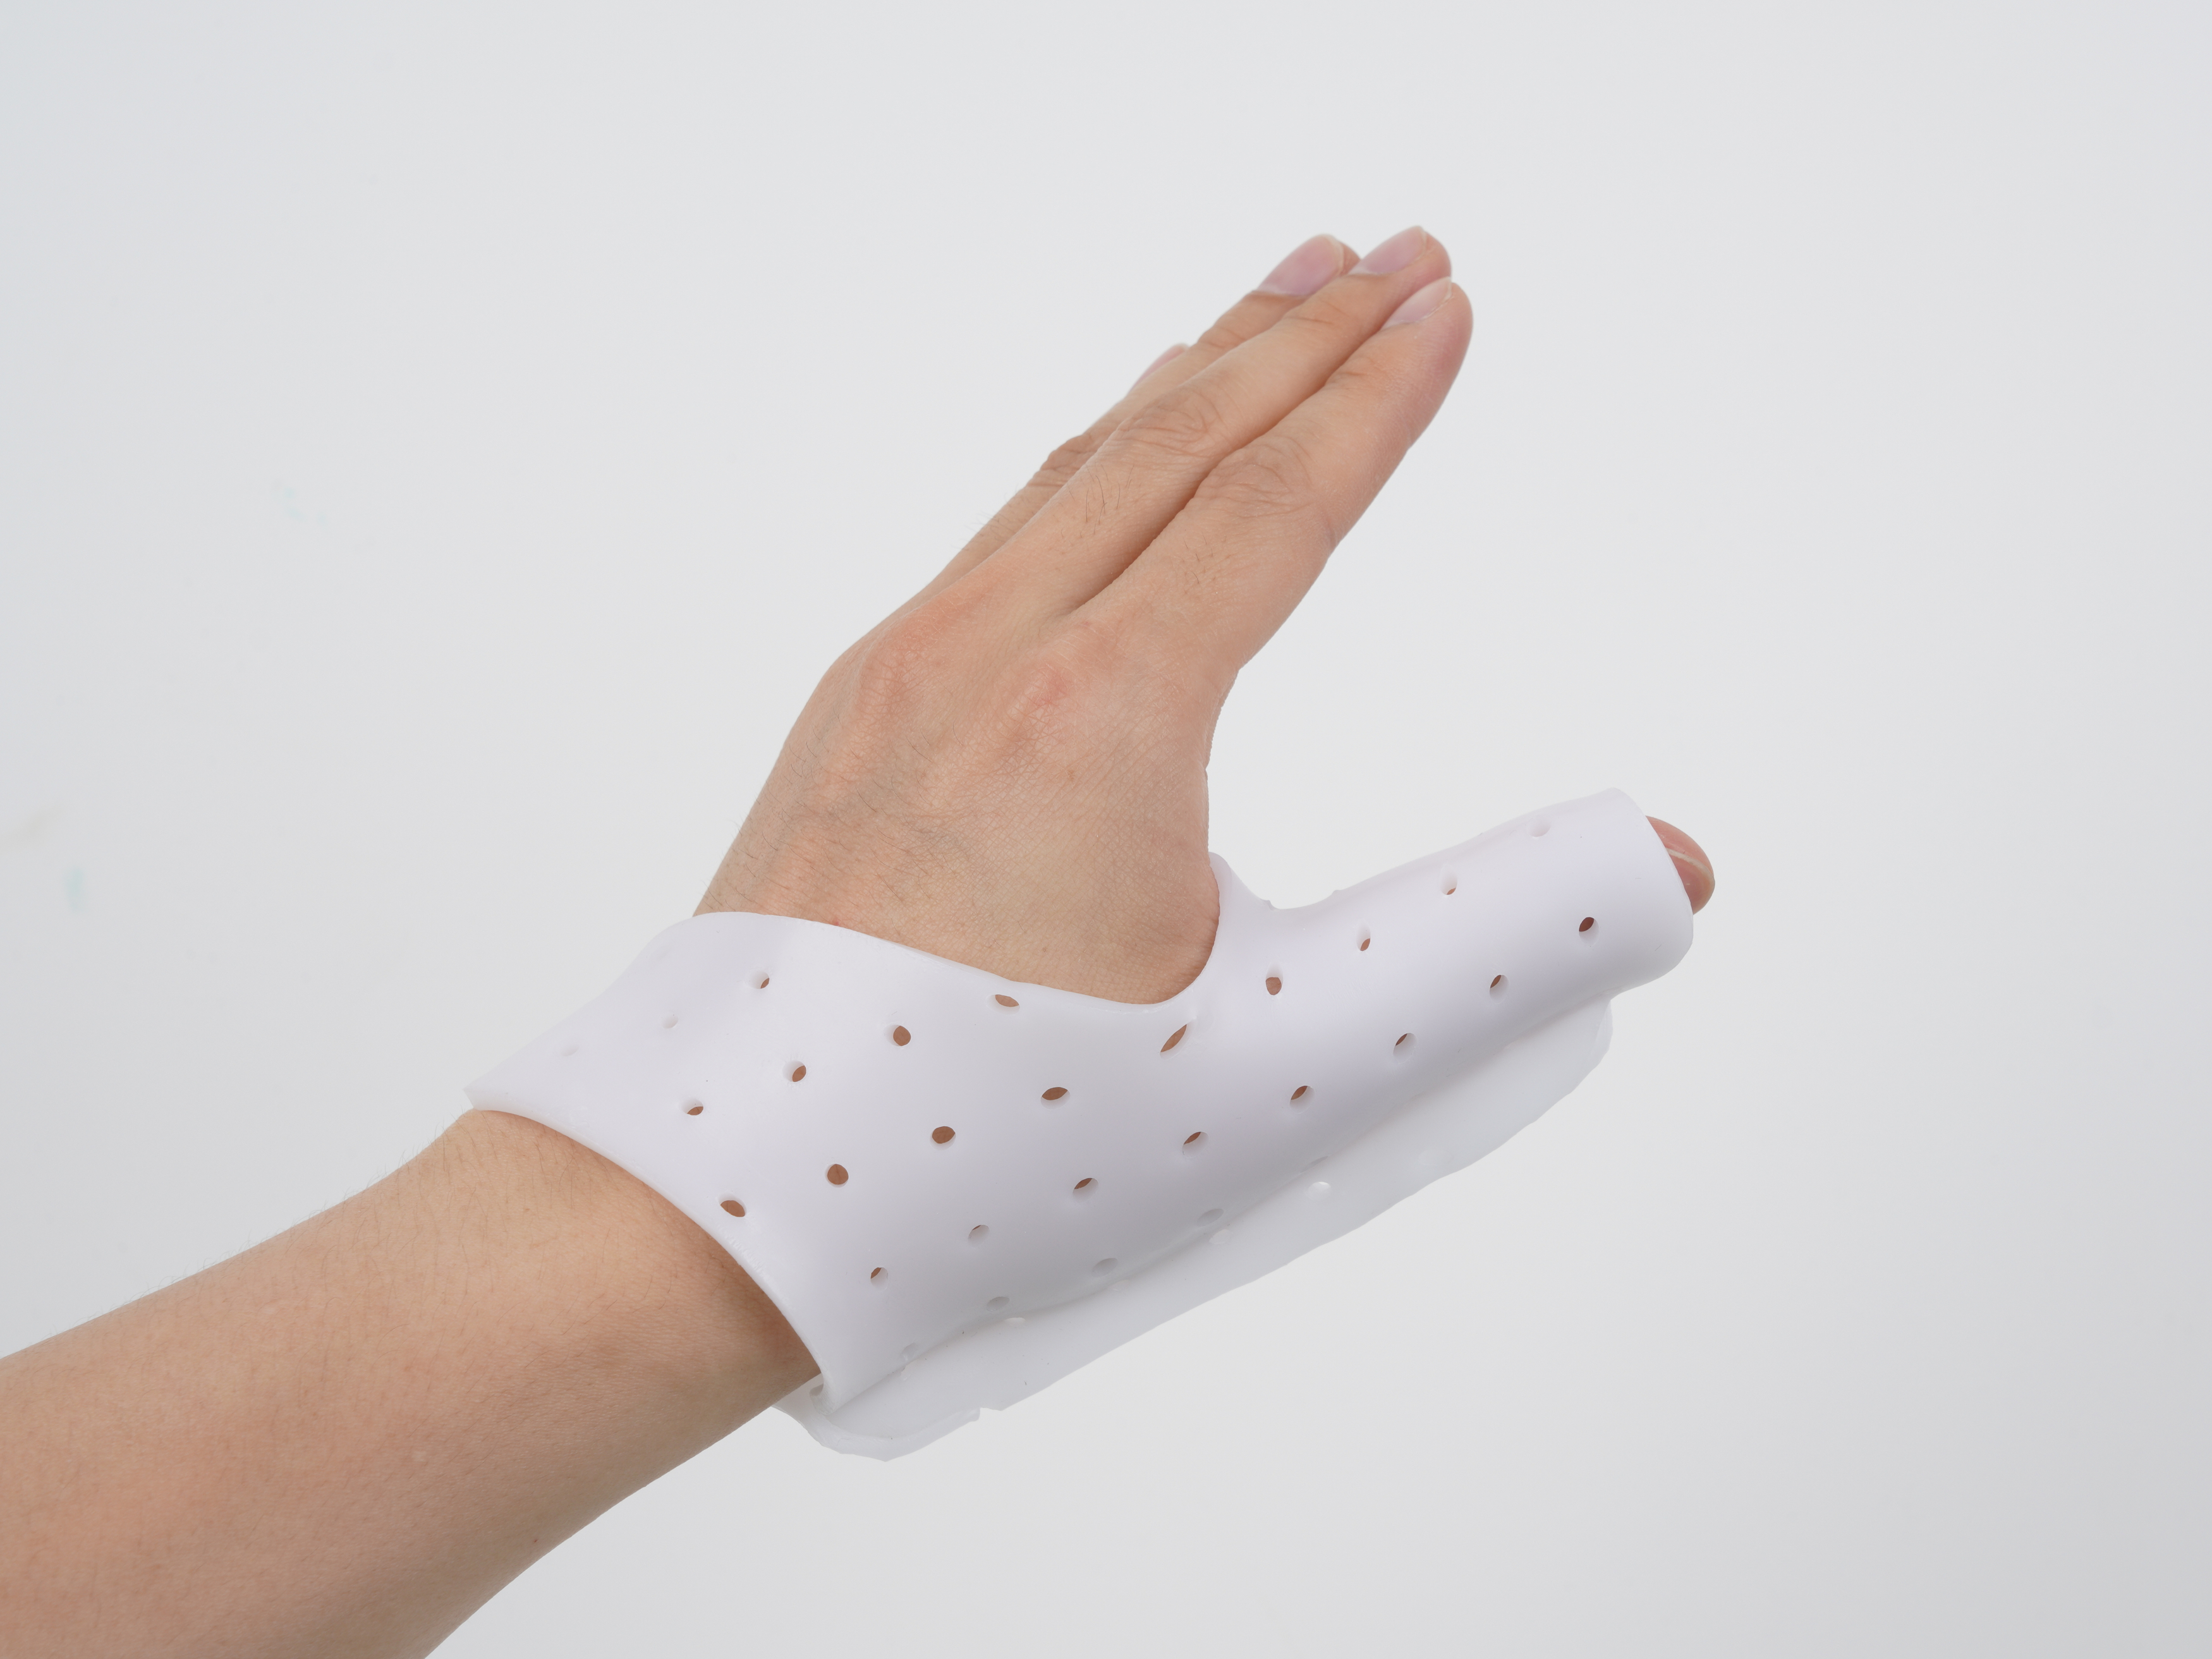 What is a thermoplastic splint？